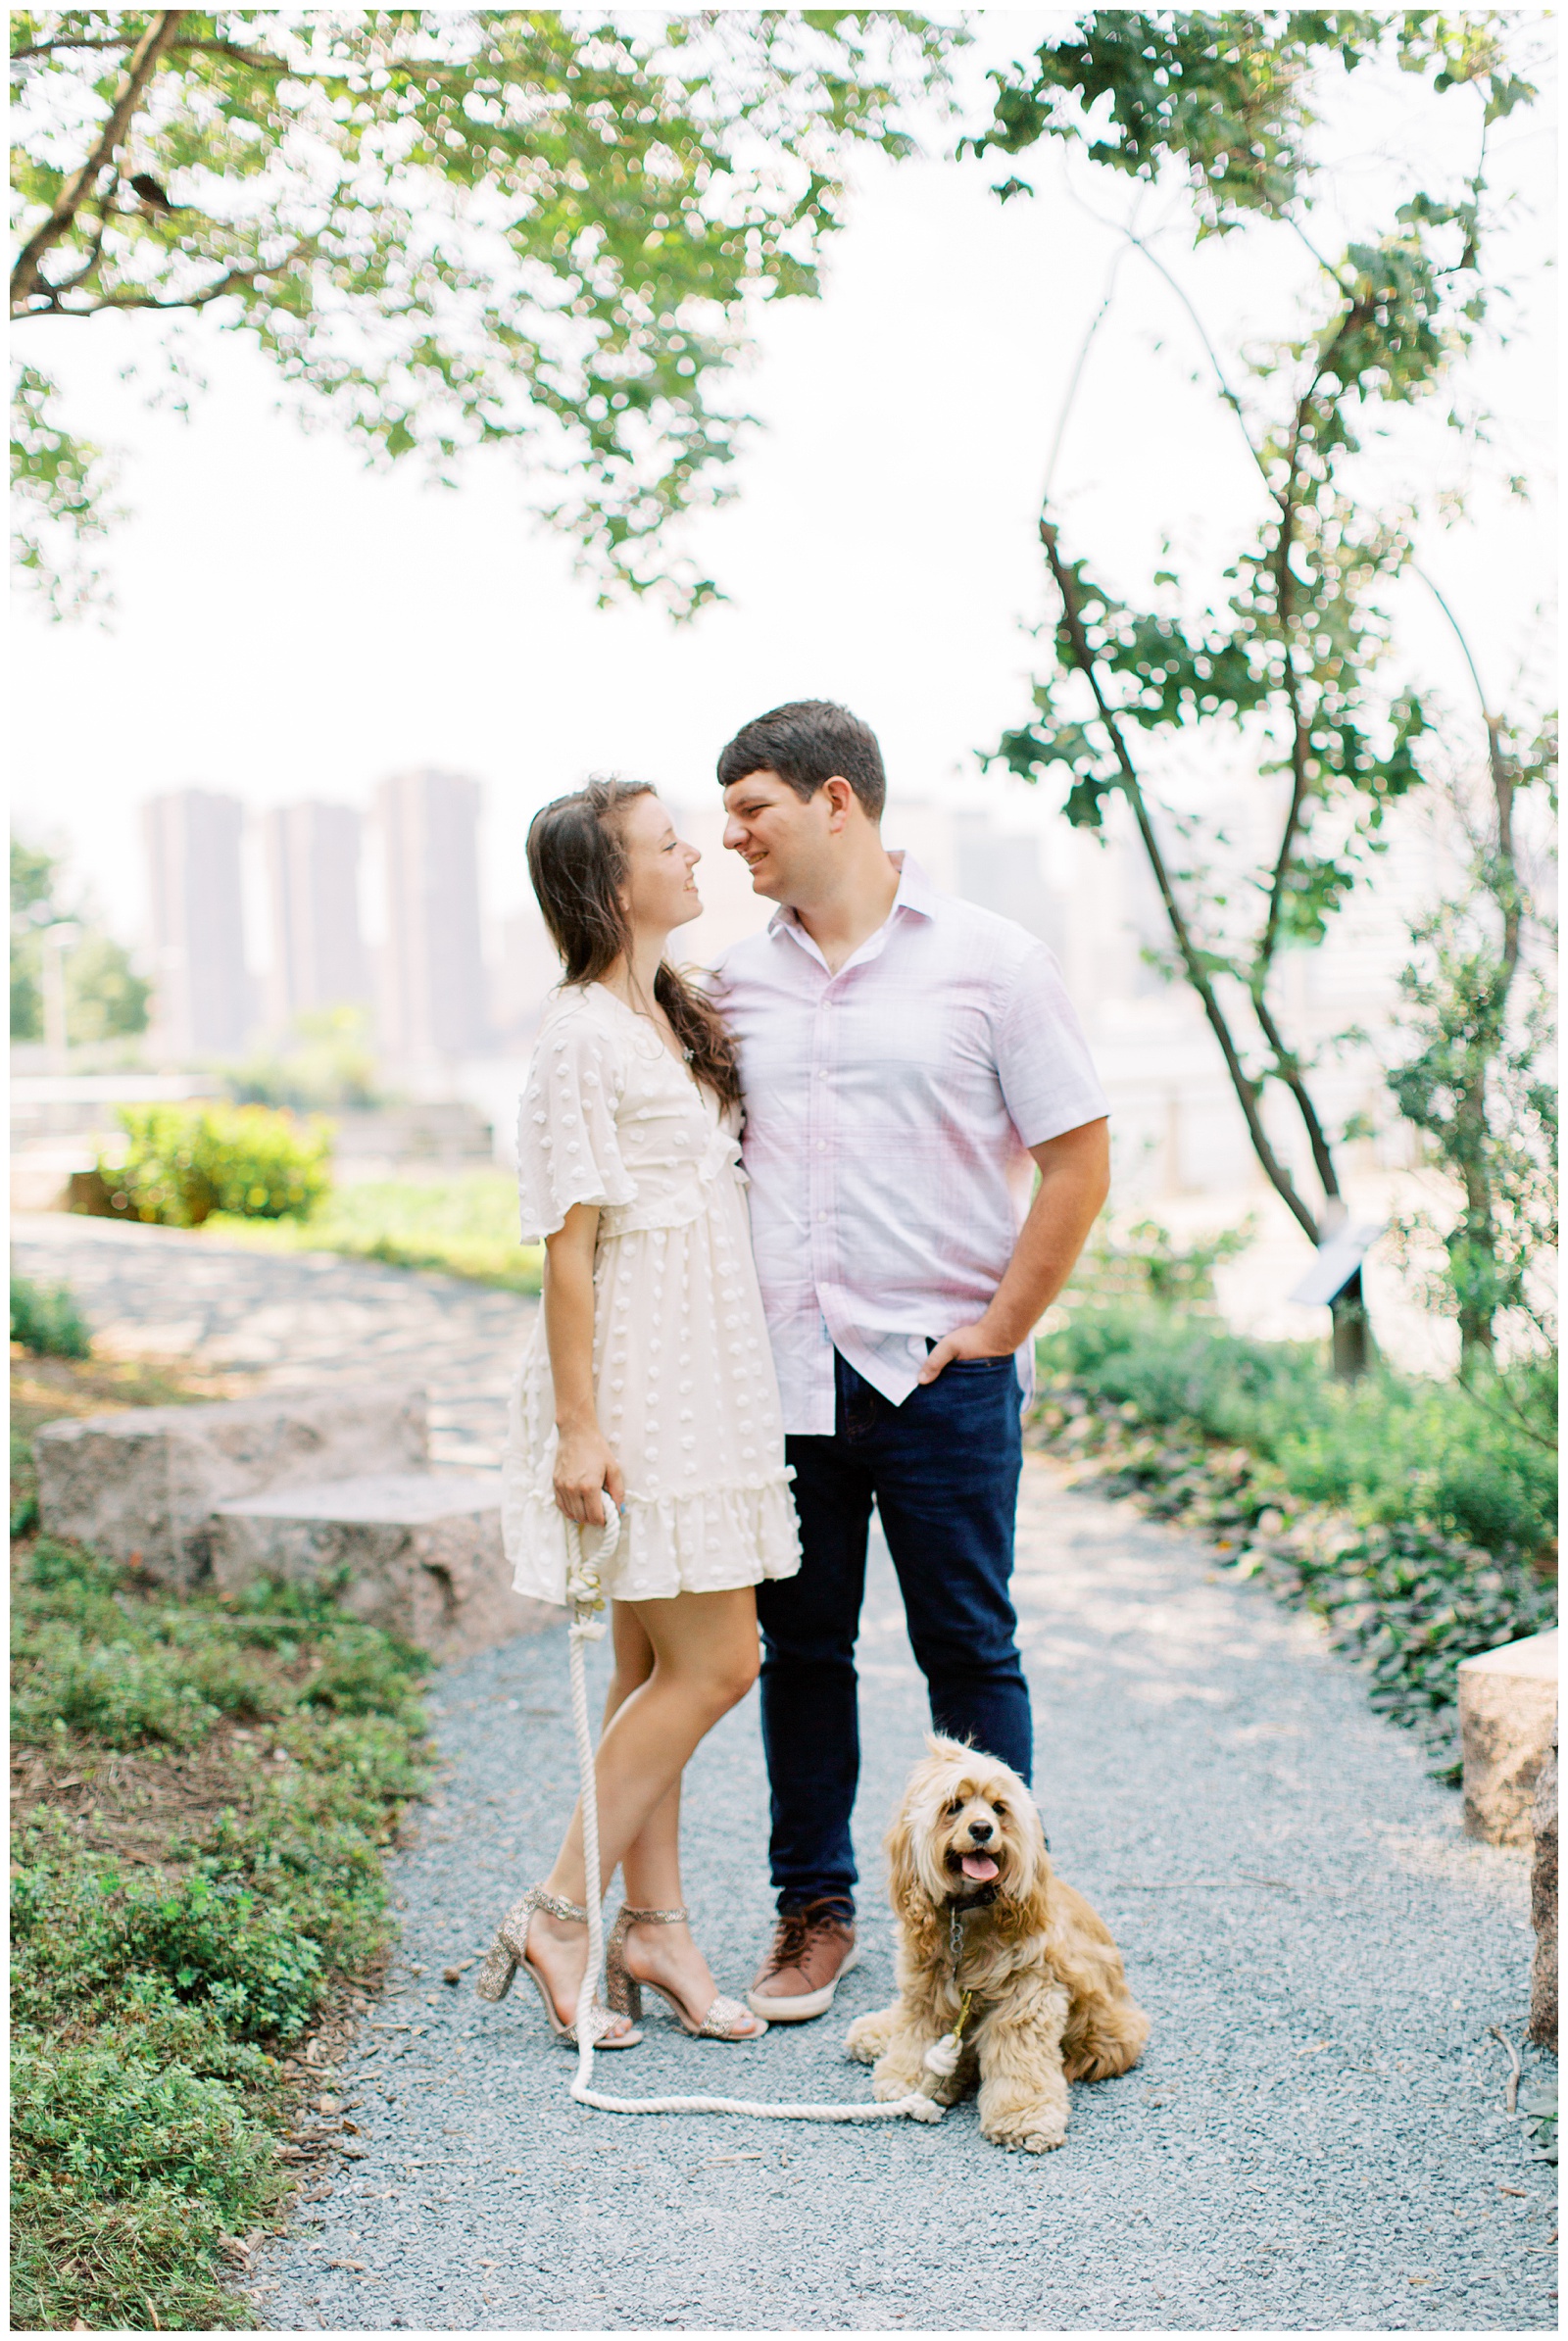 bride and groom pose with dog on walkway in New York City during engagement photos 